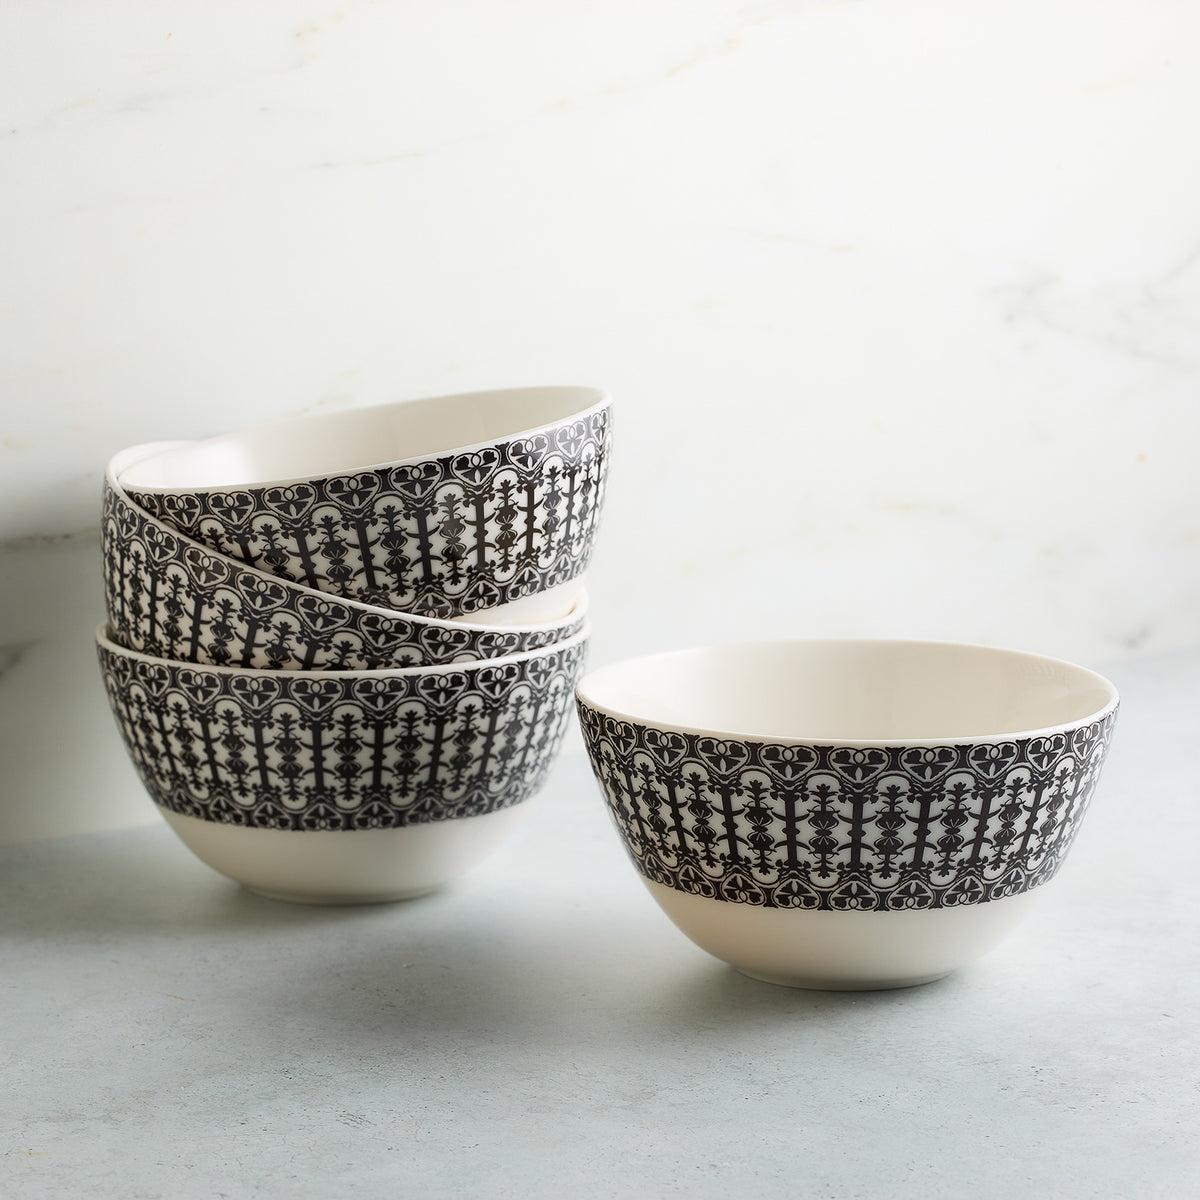 A stack of four Casablanca Tall Cereal Bowls from the Caskata Artisanal Home Geometrics Collection with black and white patterns on a marble countertop.